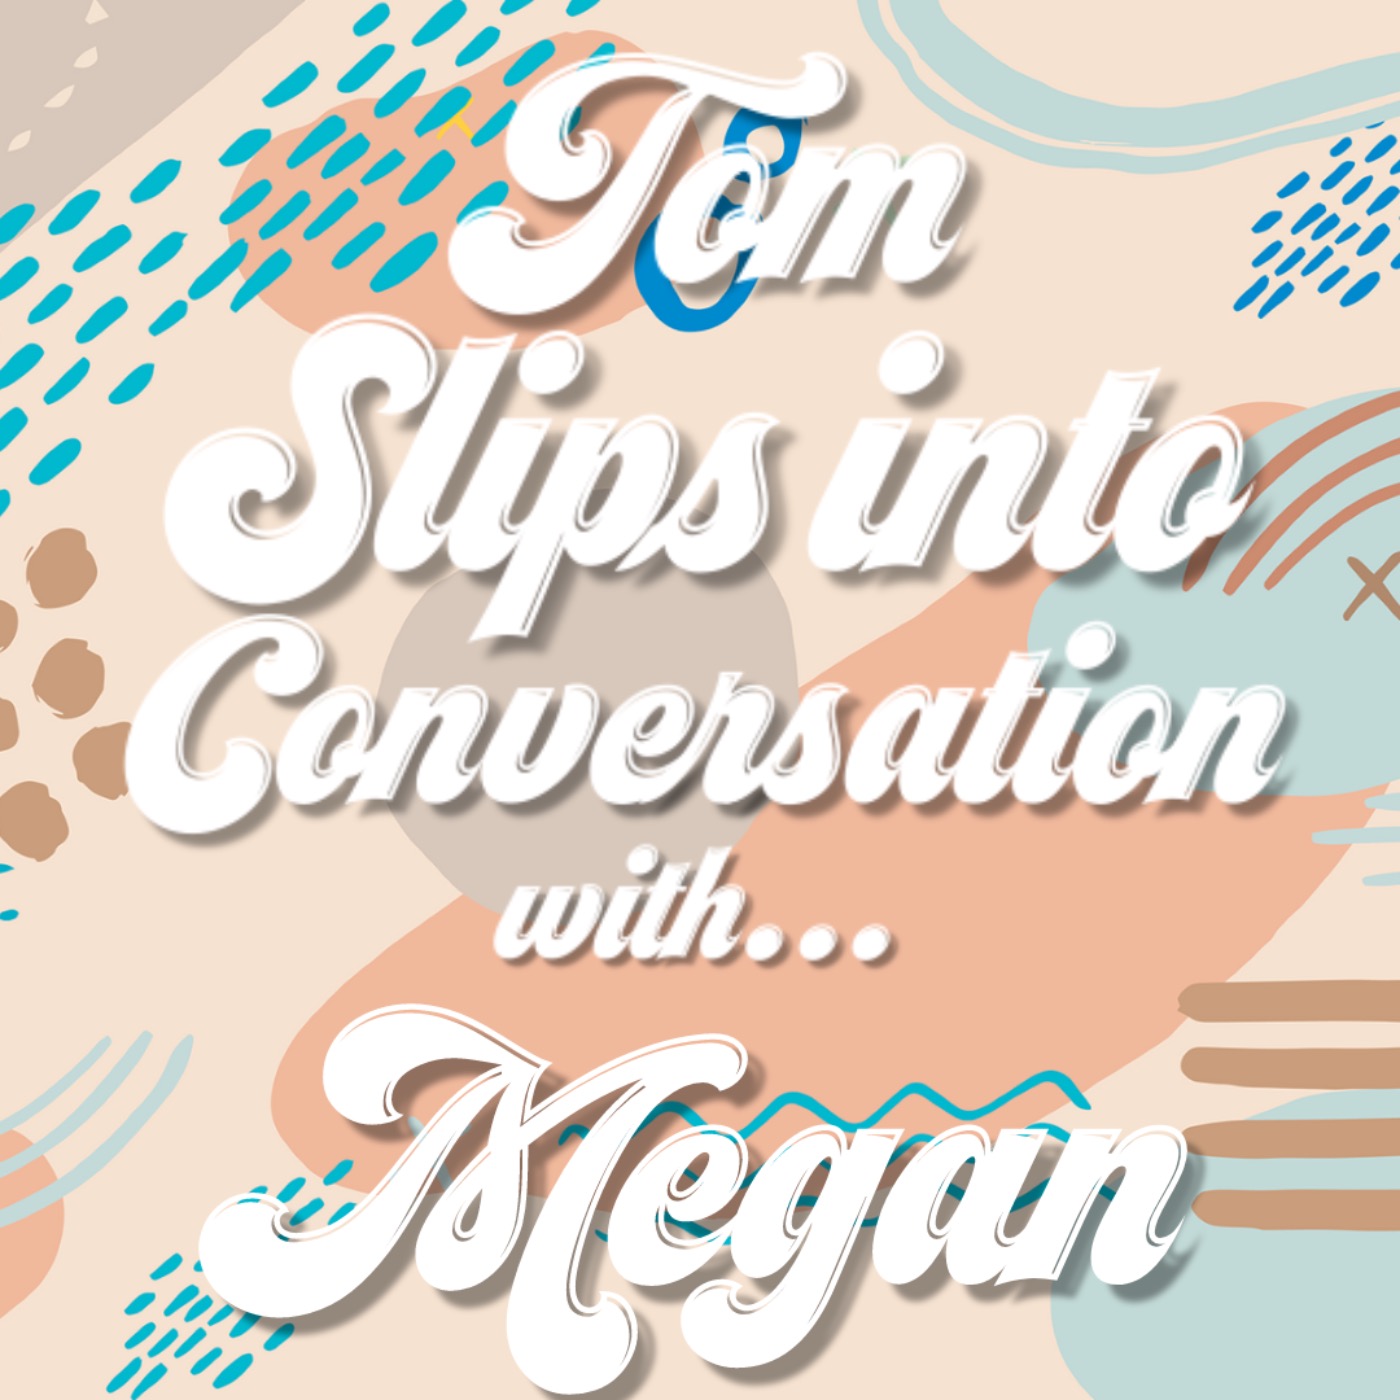 cover art for Tom slips into conversation with Megan